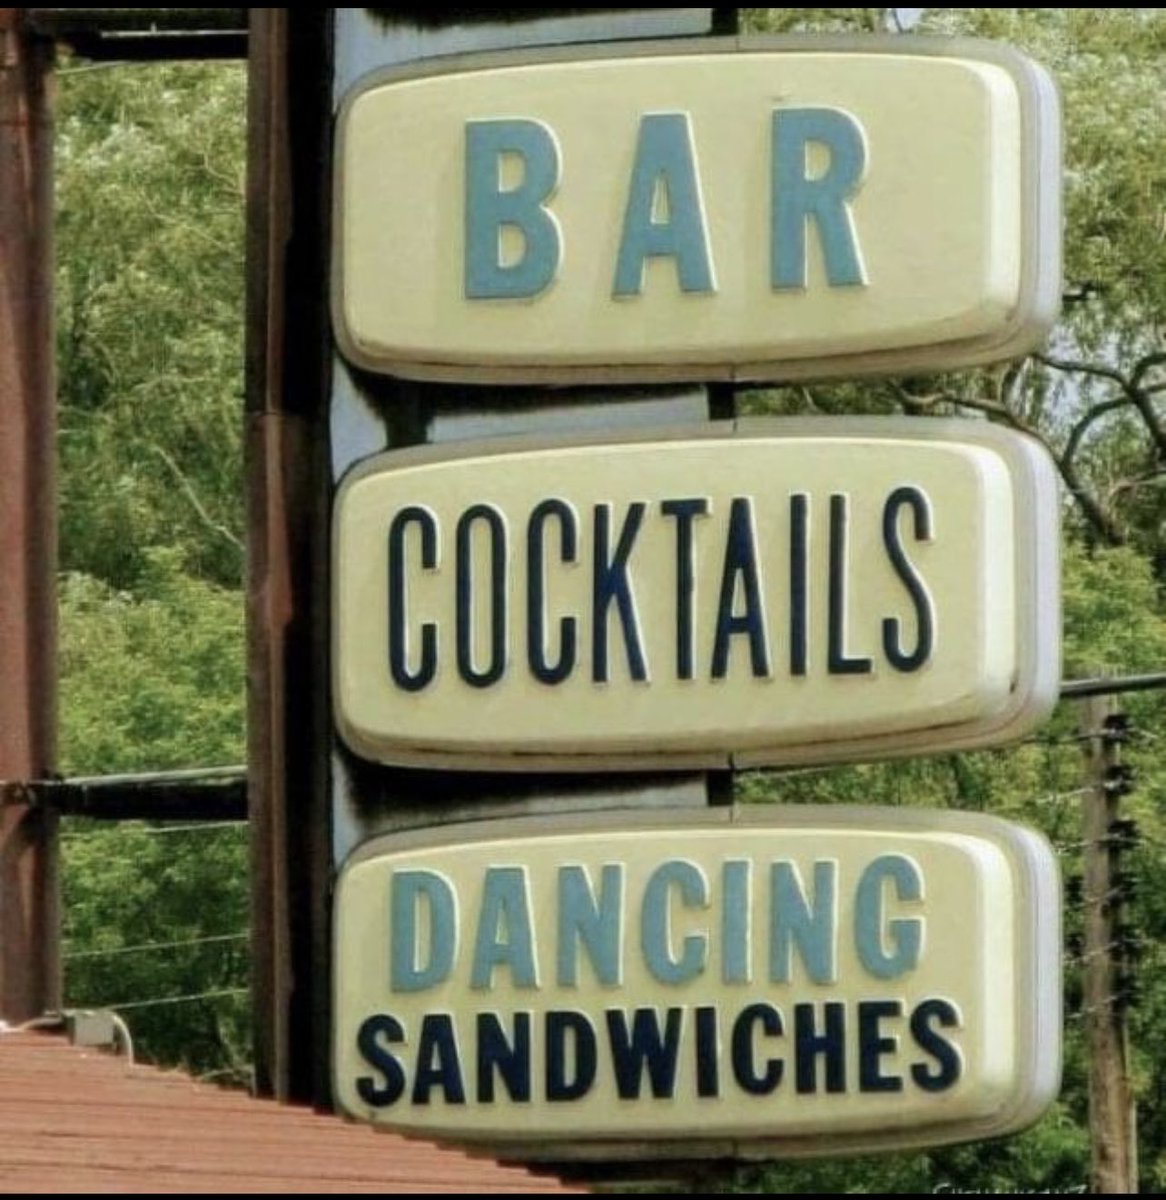 If more Bars sold Dancing Sandwiches, the world would be a happier place.